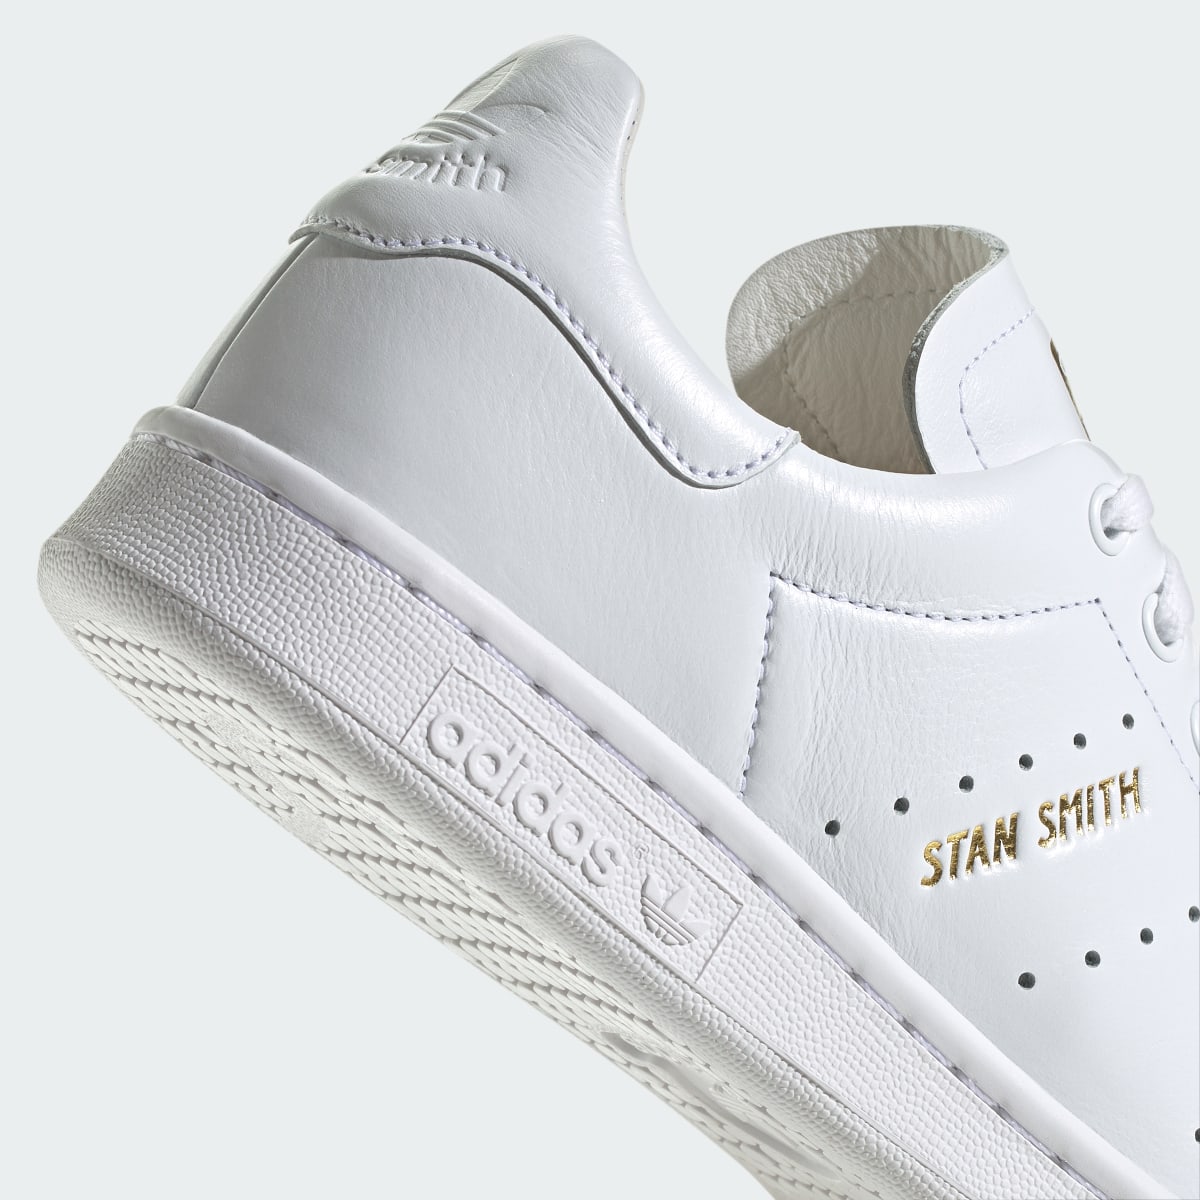 Adidas Chaussure Stan Smith Luxe. 11